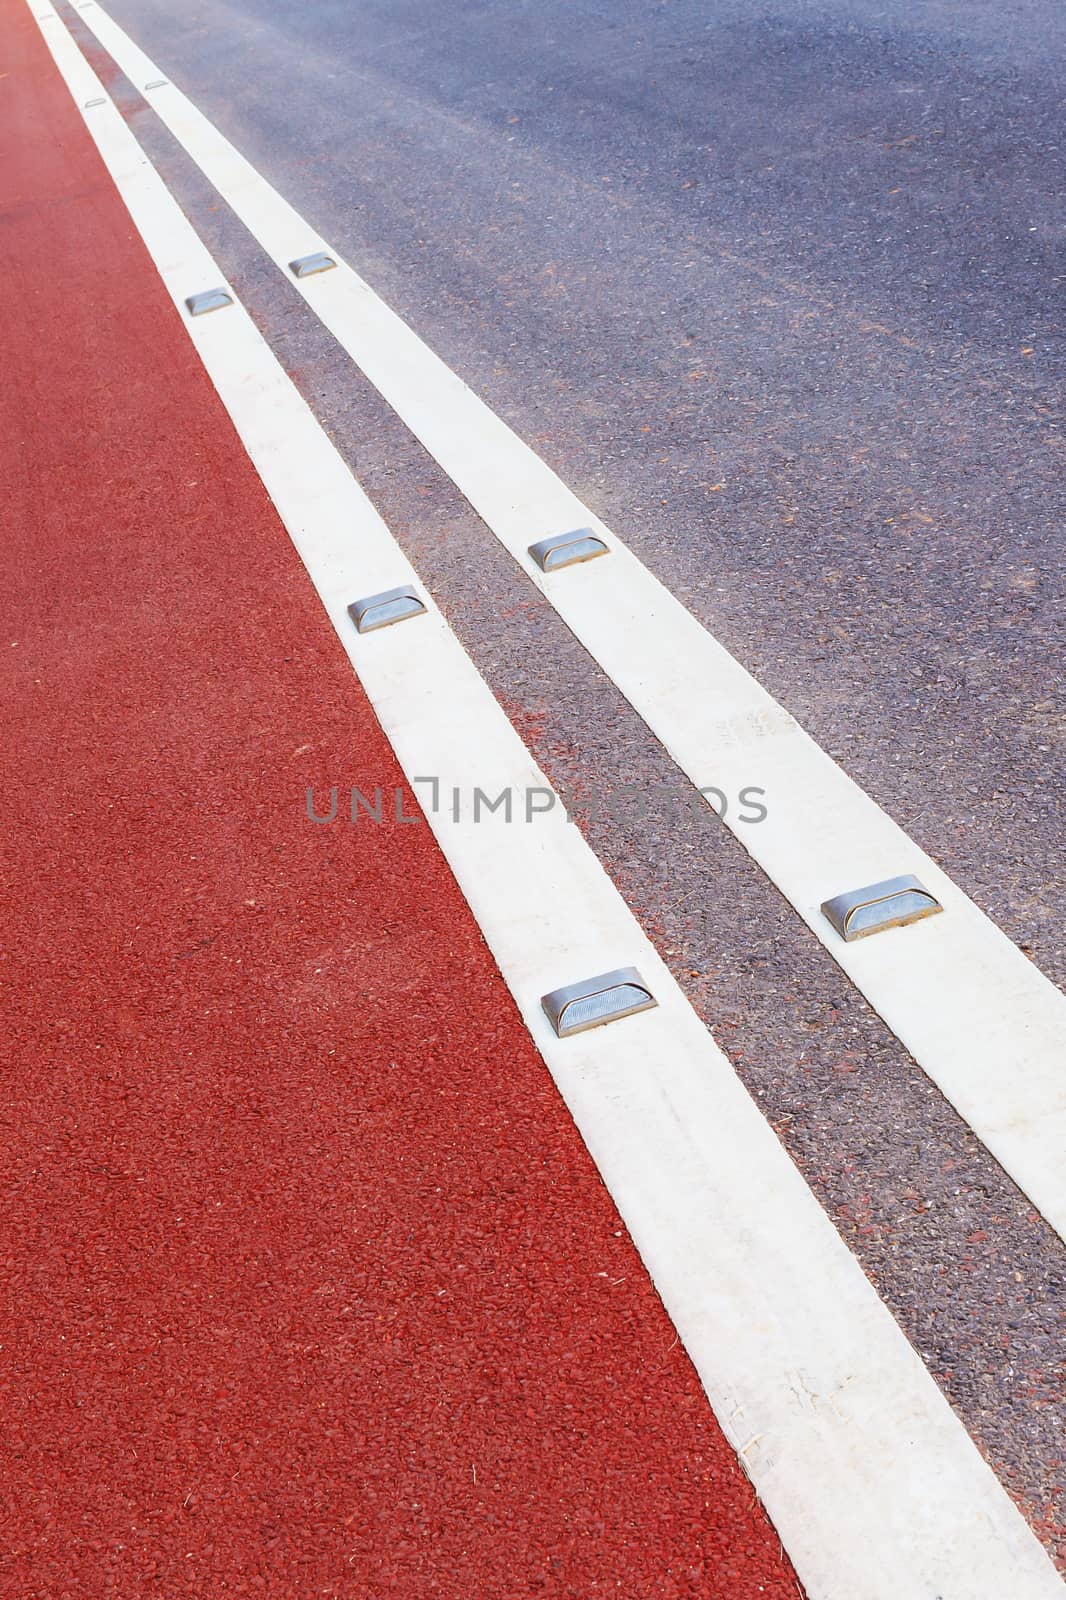 road stud with white reflector and red path